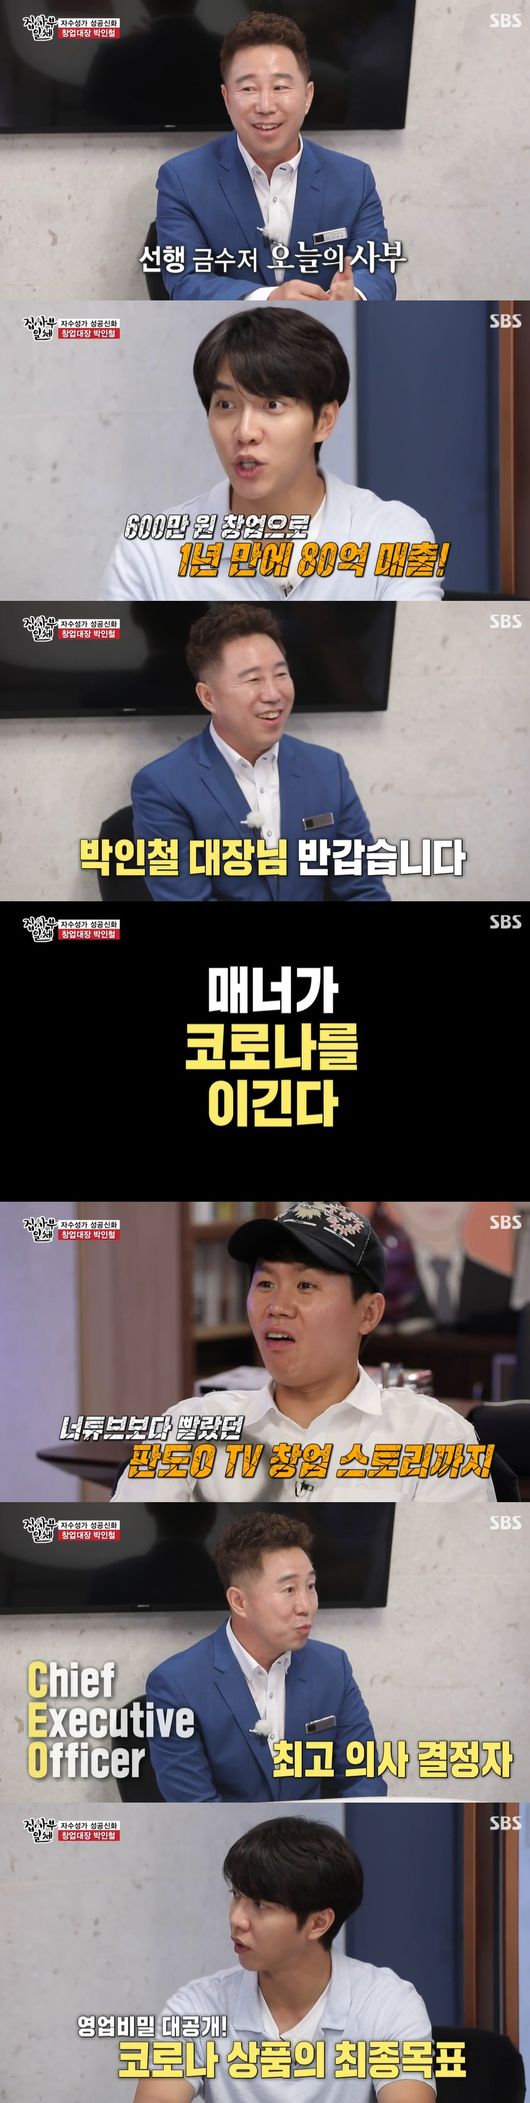 In All The Butlers, Park In-cheol appeared as a master and told the story of his growth as a good company.Park In-cheol appeared in the master at SBS entertainment All The Butlers broadcast on the 6th.The production team cited the biggest difference between 2019 and 2020 as Mask, referring to our changes in too much for six months.In the meantime, he mentioned price surges such as Hand sanitizer and Mask, and he said that he would meet representatives of good companies that lowered the price of Mask and sold Hand sanitizer at half price.The members introduced a list of companies that should be paid for by conveying good good companies that have come to overcome the crisis, saying, This person should be praised and known.I met the master who conveyed the good influence that gives power to everyone in earnest.The production team introduced the master as a firm management Philosophy, introducing the master, saying, Lets prove that a company can grow while fulfilling its social responsibilities. He was called the founder.He handed over his business card from the beginning and introduced the reason for the CCO saying, My own weapon to grow the company is culture.Cha Eun-woo said, I know it is a good and good company, but what exactly is the company?Park In-cheol, the master of the company, said, It is a company that sells WOW. He introduced it as a company that makes consumers happy and valuable with an admirable product.Lee Seung-gi said, It is a company that should be paid, but introduces that it sells Mask and hand disinfectant. Master Park In-cheol said, The final goal of the products released at Corona 19 is to stop selling the products. I hoped.I hope that this time will be a healthy market. The members laughed when they said, You have to be better.So, it is said that there is a lot of rumors that it is a good company in Korea overseas, and it is exporting a lot.Above all, it was surprising that it started with 6 million won and made 8 billion sales myth.All The Butlers broadcast screen capture